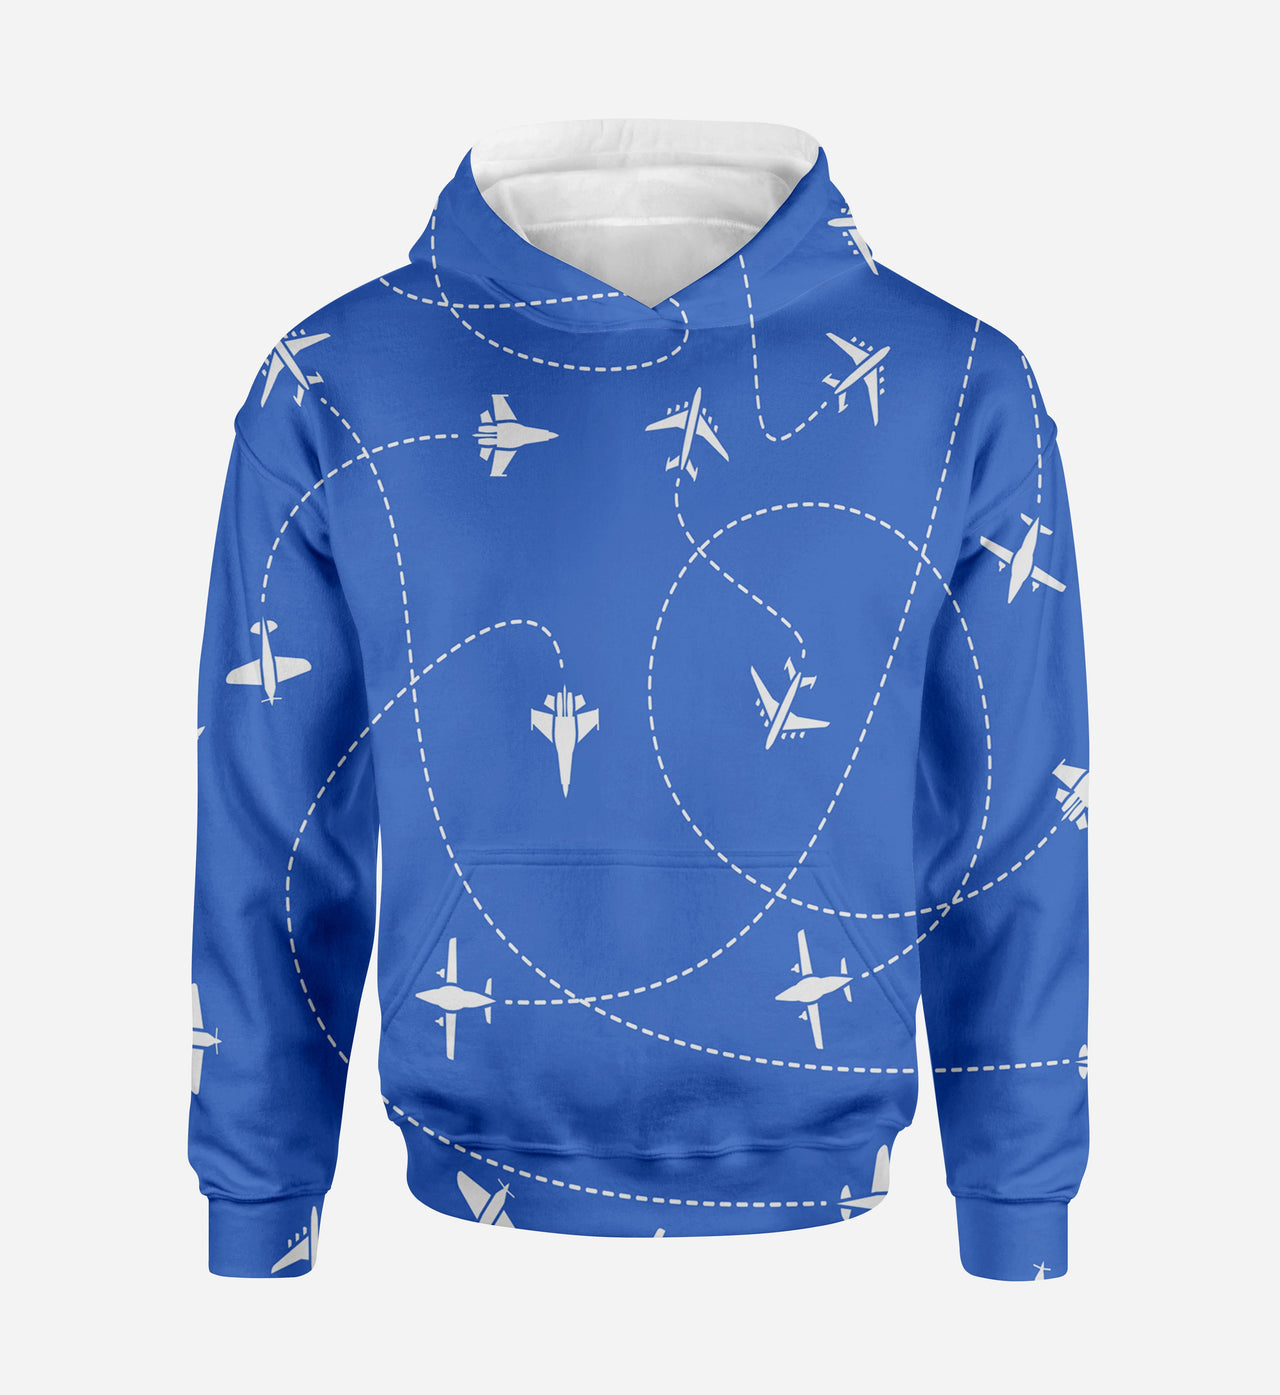 Travel The World By Plane (Blue) Printed 3D Hoodies